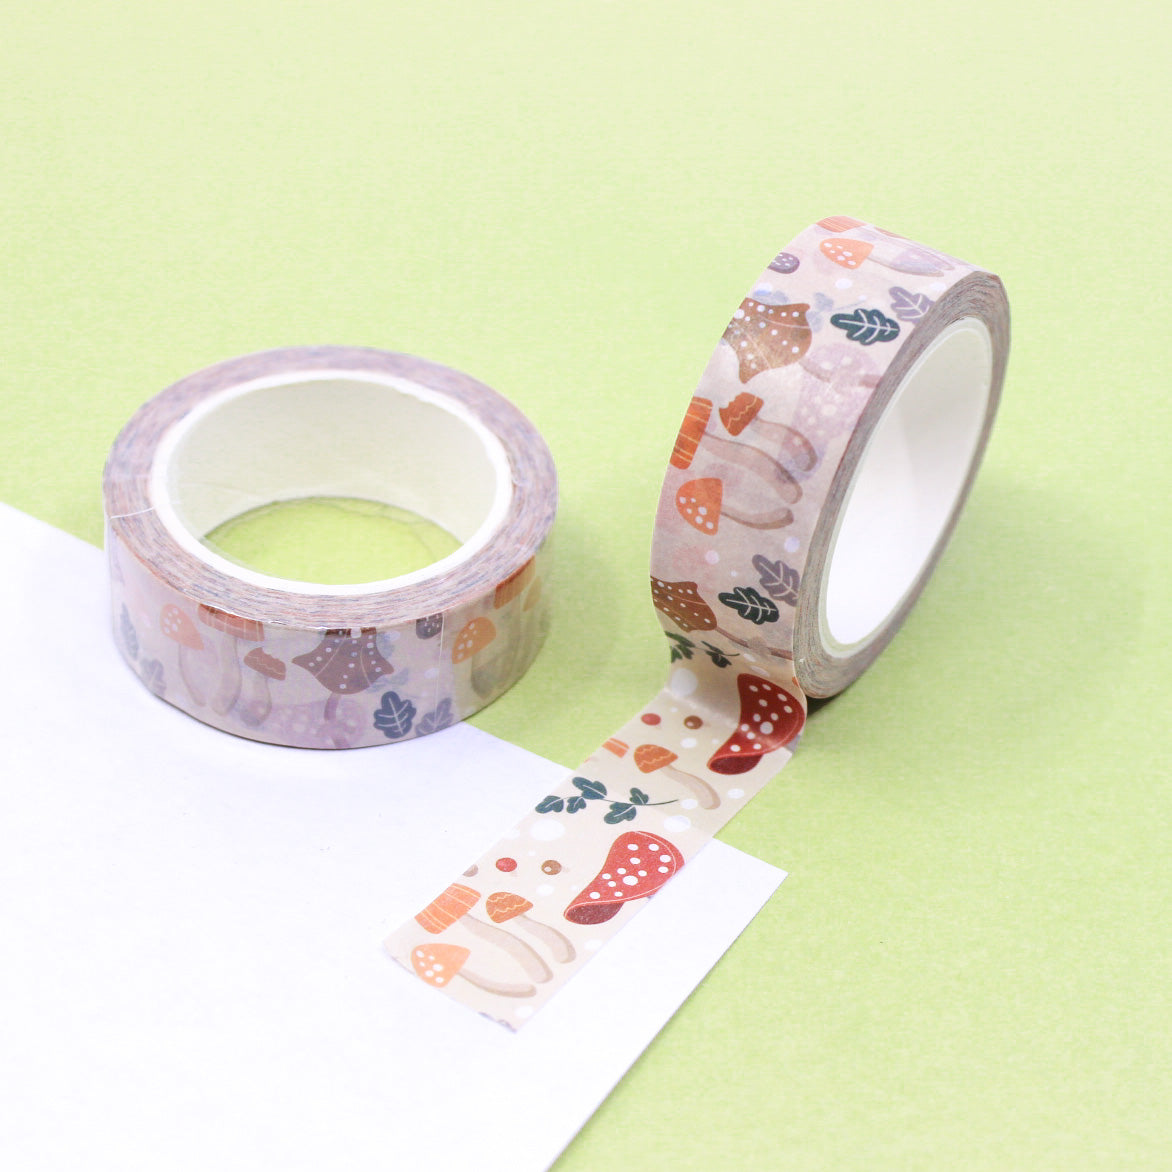 Add a natural touch to your projects with this washi tape featuring a pattern of tan mushrooms. Perfect for nature-themed crafts, scrapbooking, or adding a rustic flair to your journal pages. This tape is sold at BBB Supplies Craft Shop.